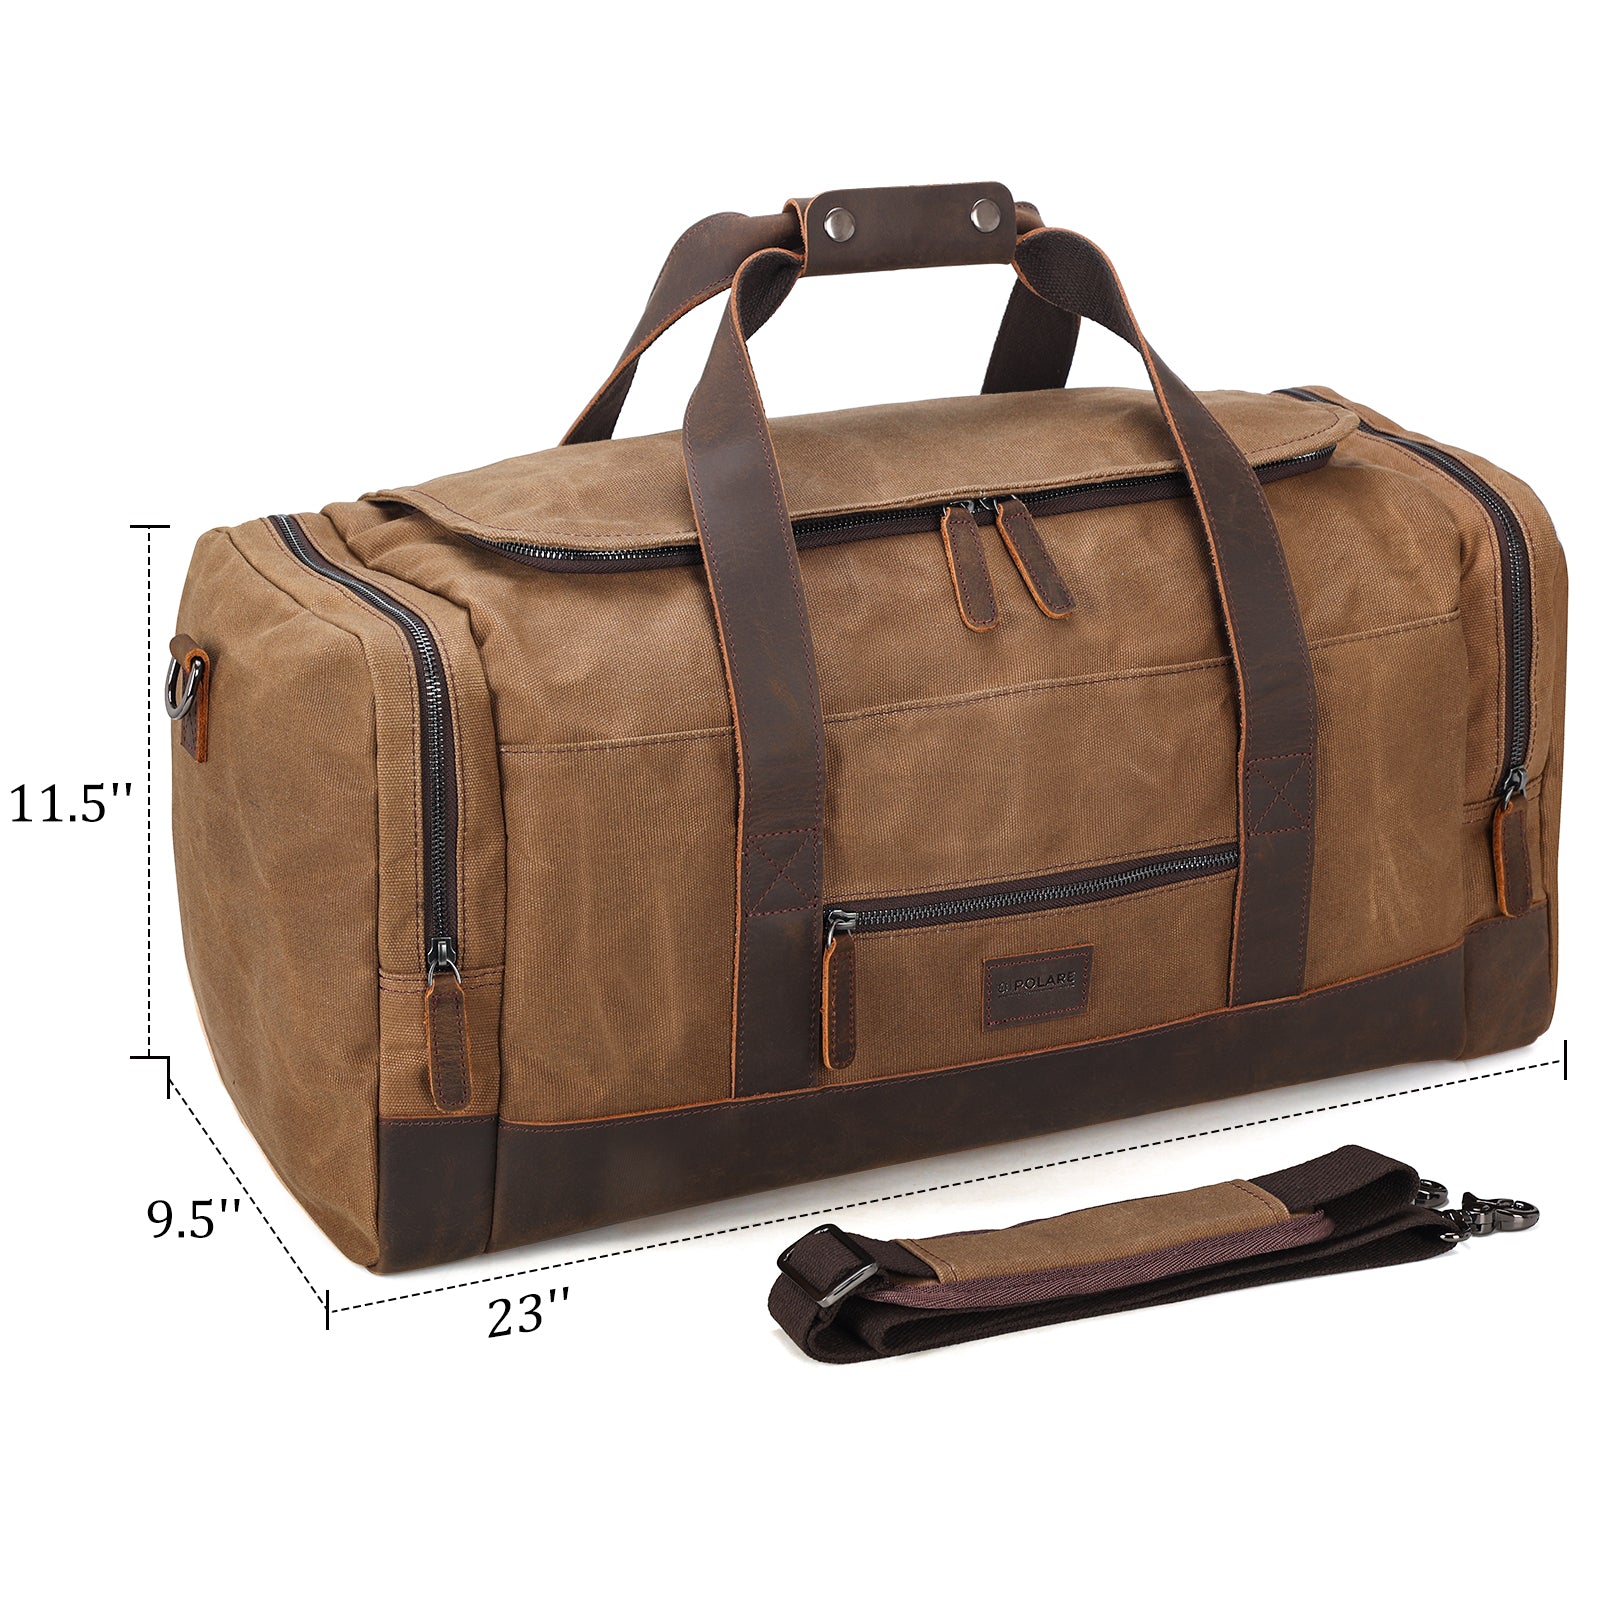 23" Canvas Leather Bag 42L Waterproof  Travel Carry on Duffel Bag (Dimension)